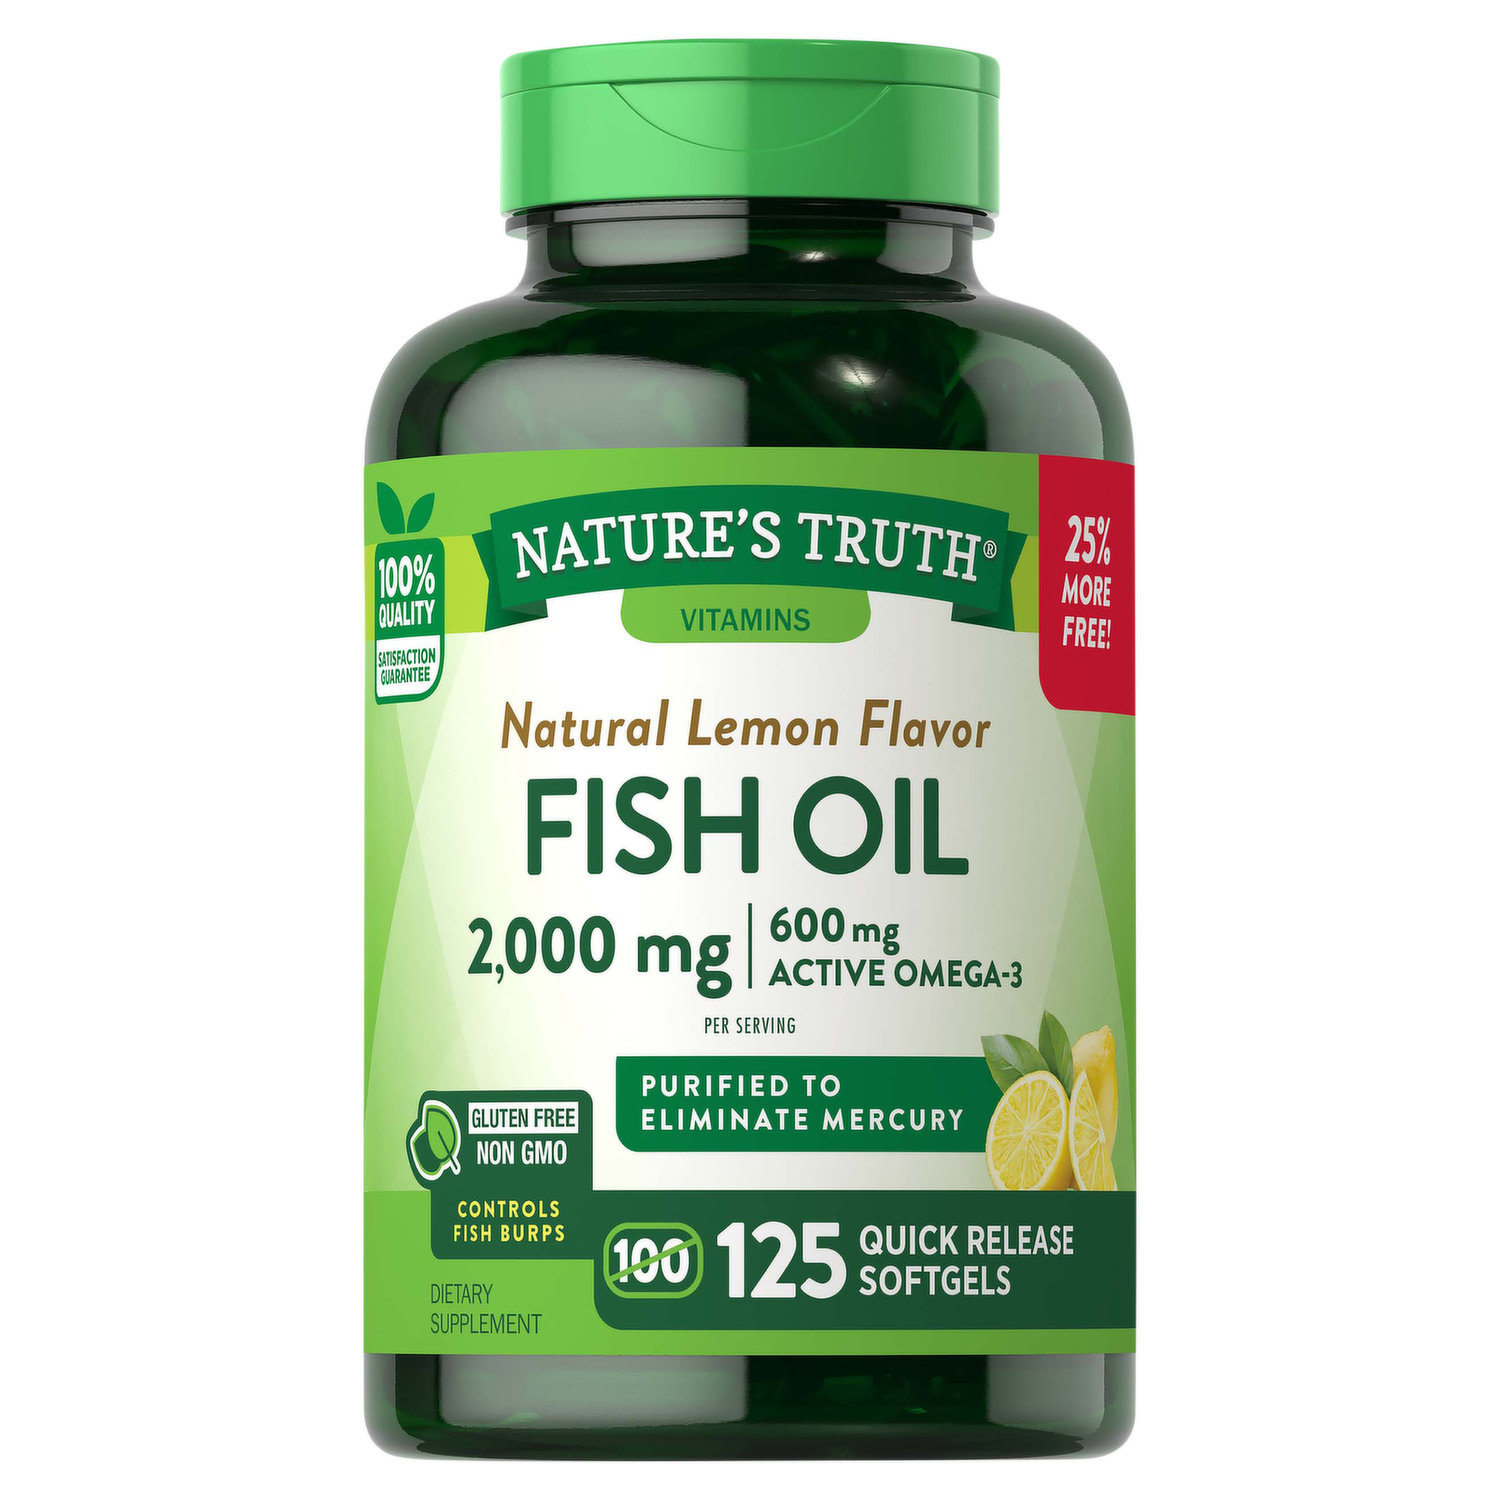 Why I Love this Fish Oil?! TruLife Premium Fish Oil has 1,000 mg of c